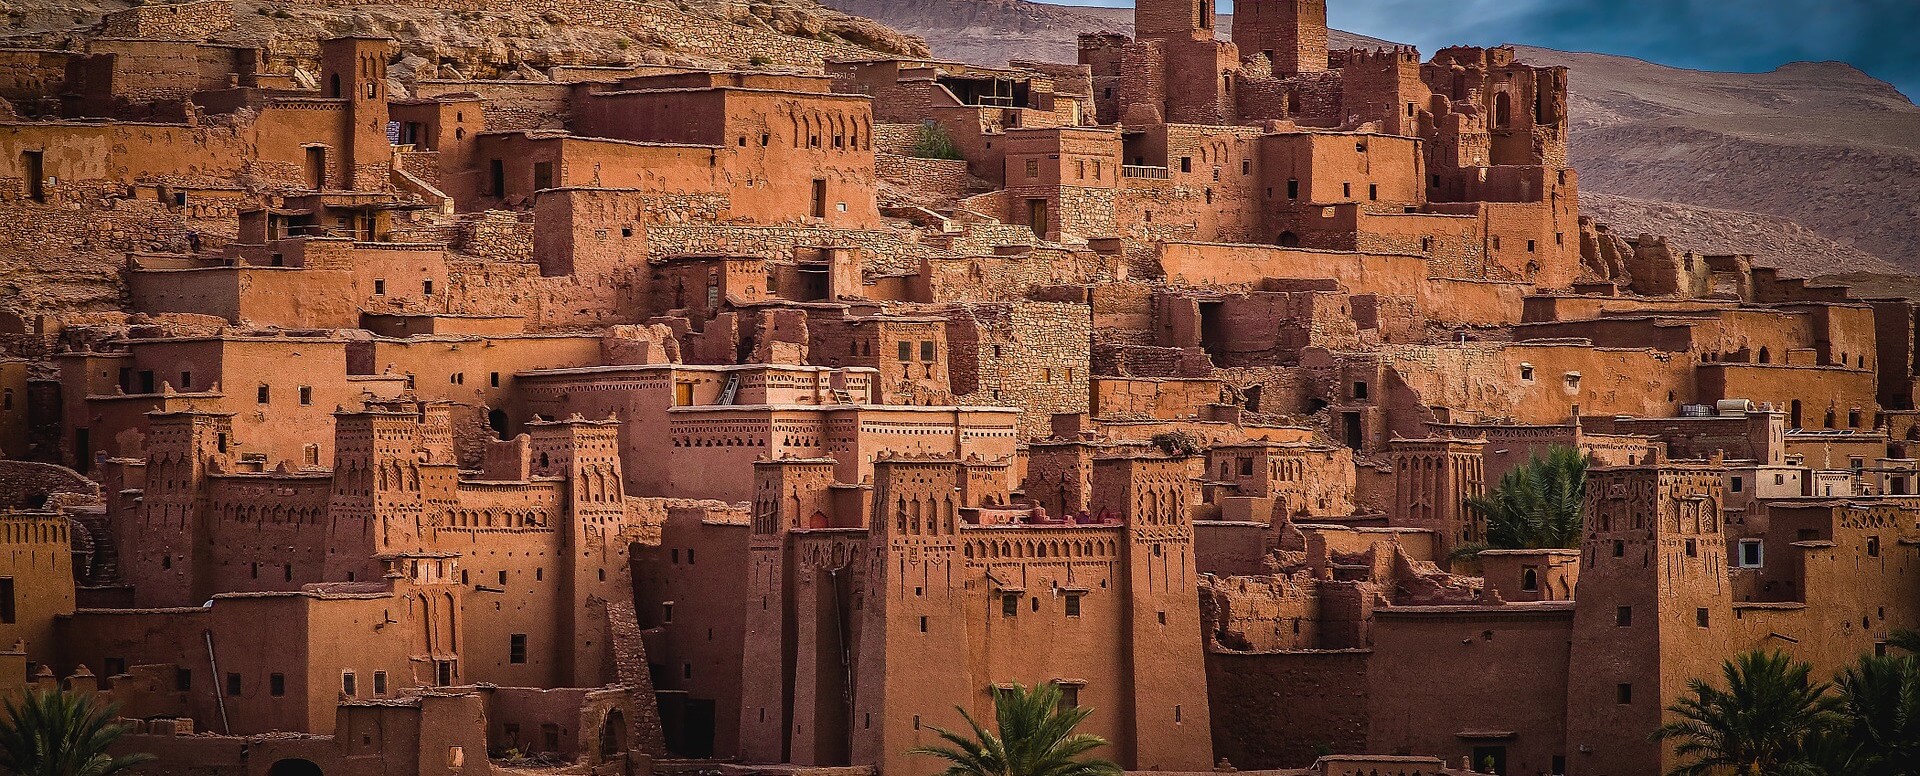 10 things to do in Morocco - Morocco